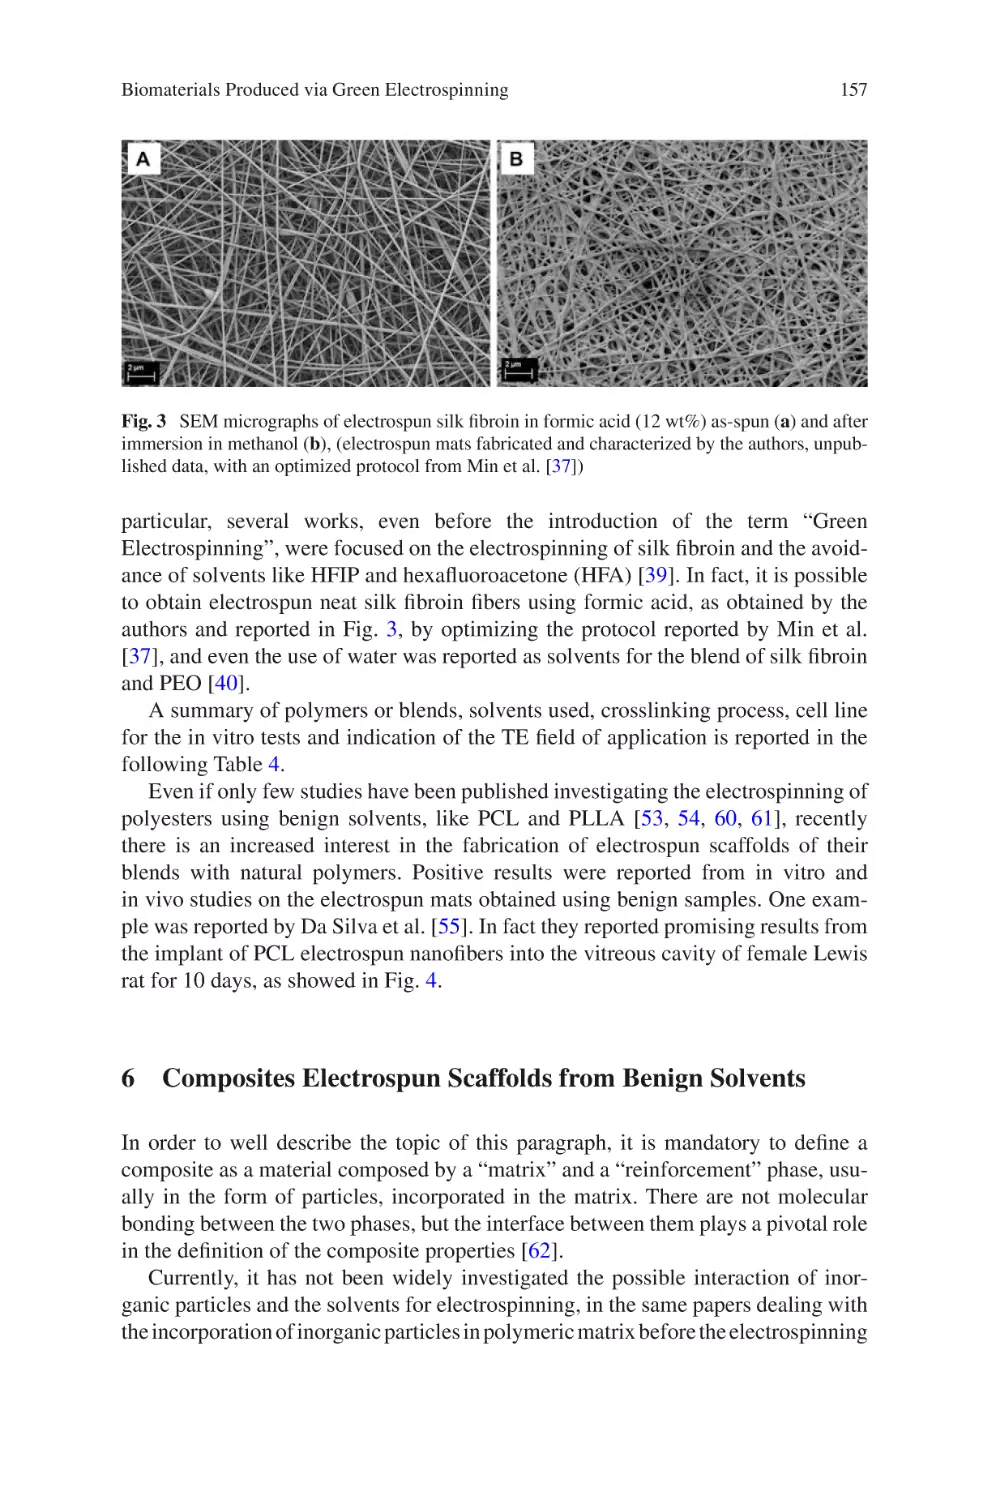 6 Composites Electrospun Scaffolds from Benign Solvents